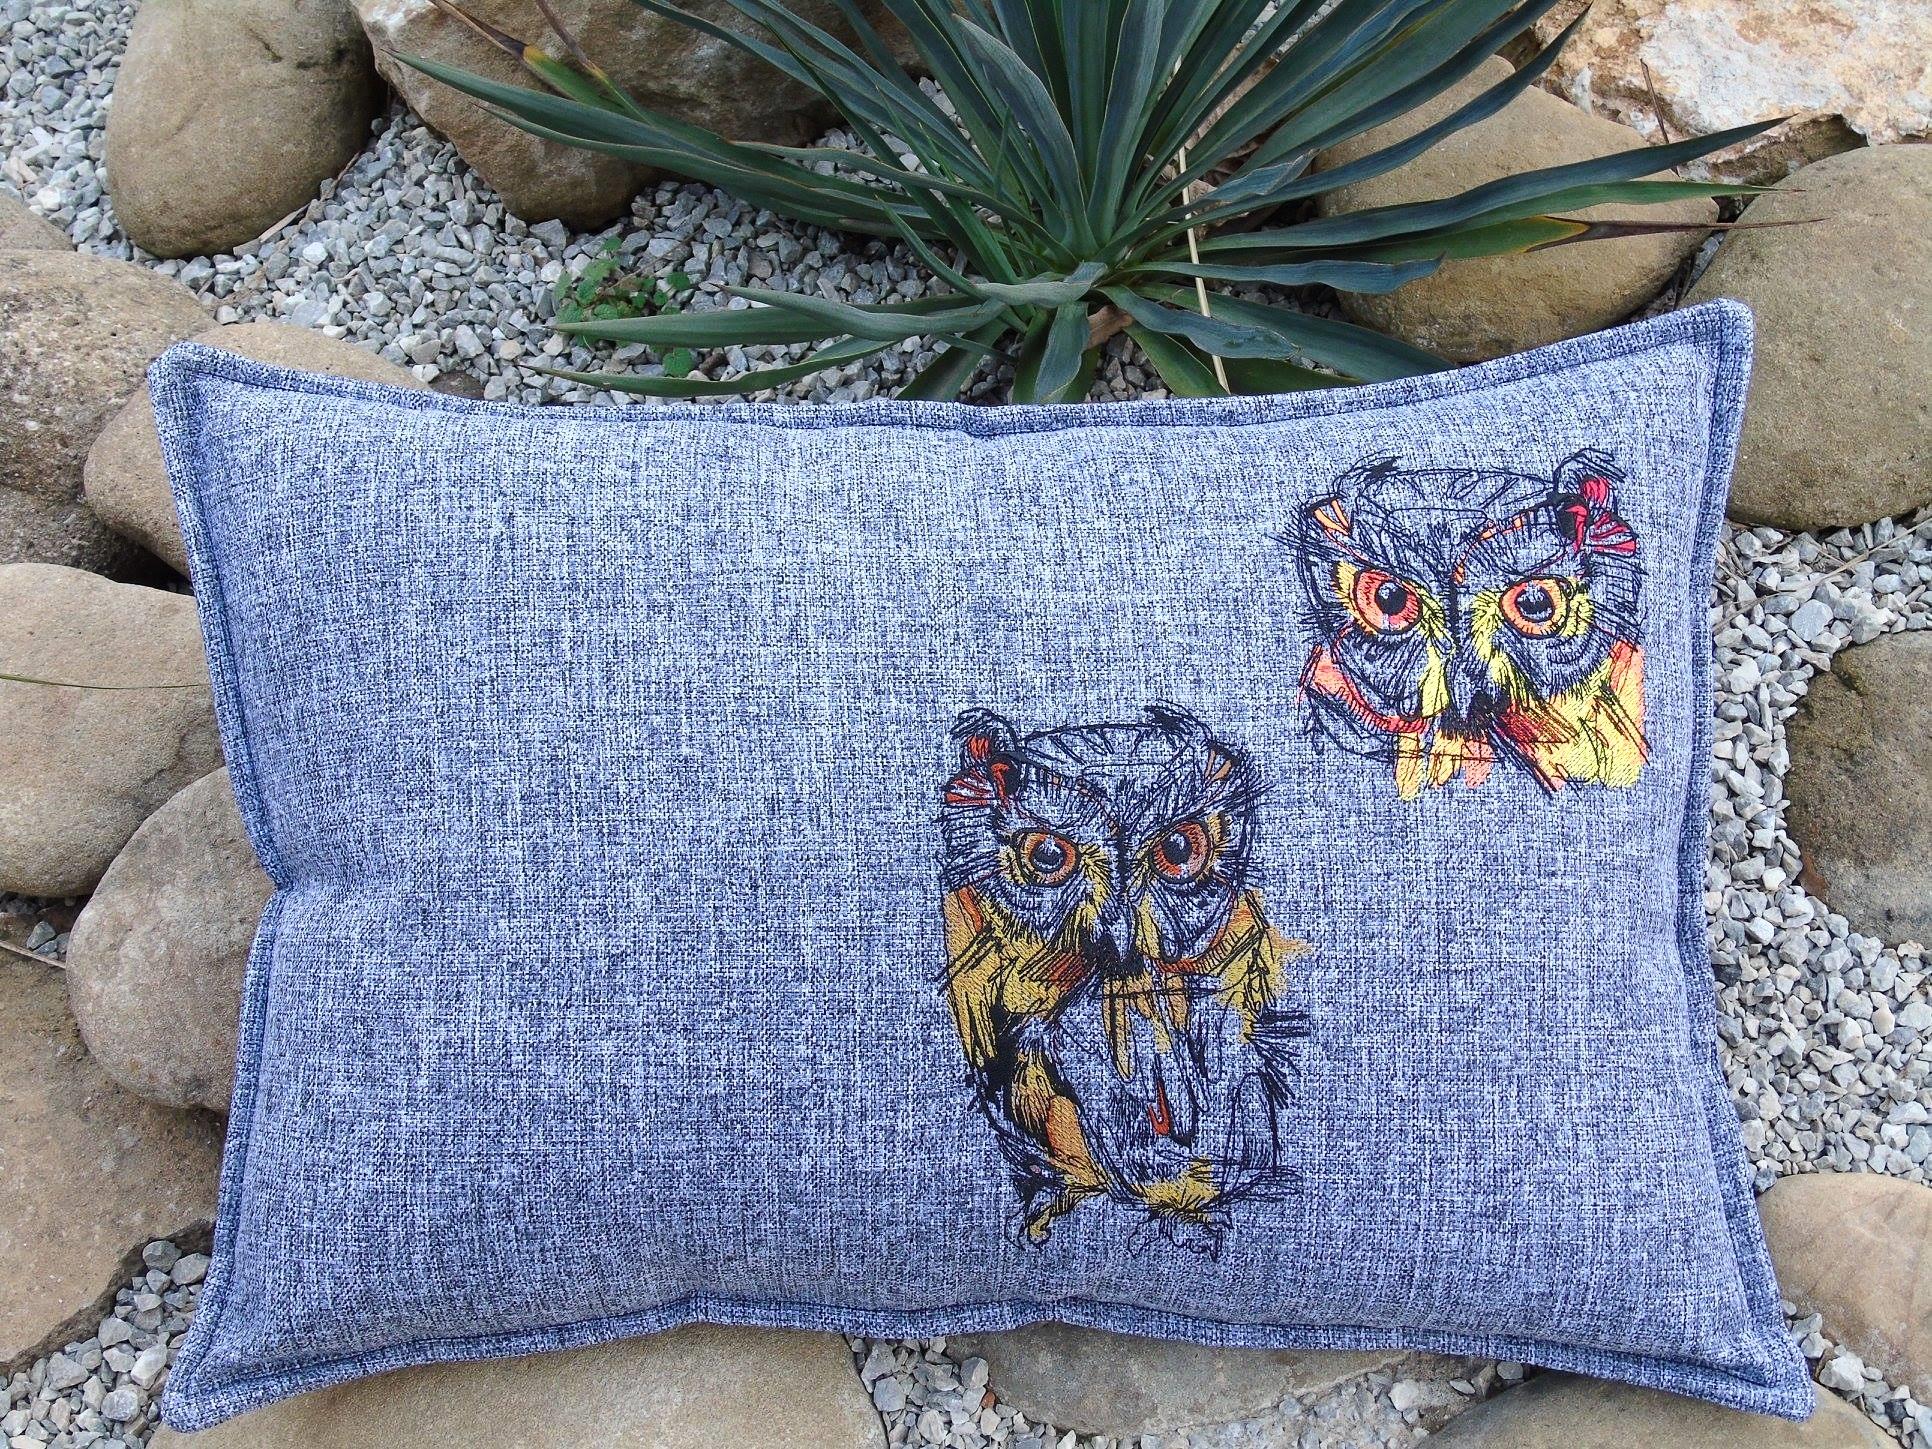 Embroidered cushion with Owls designs